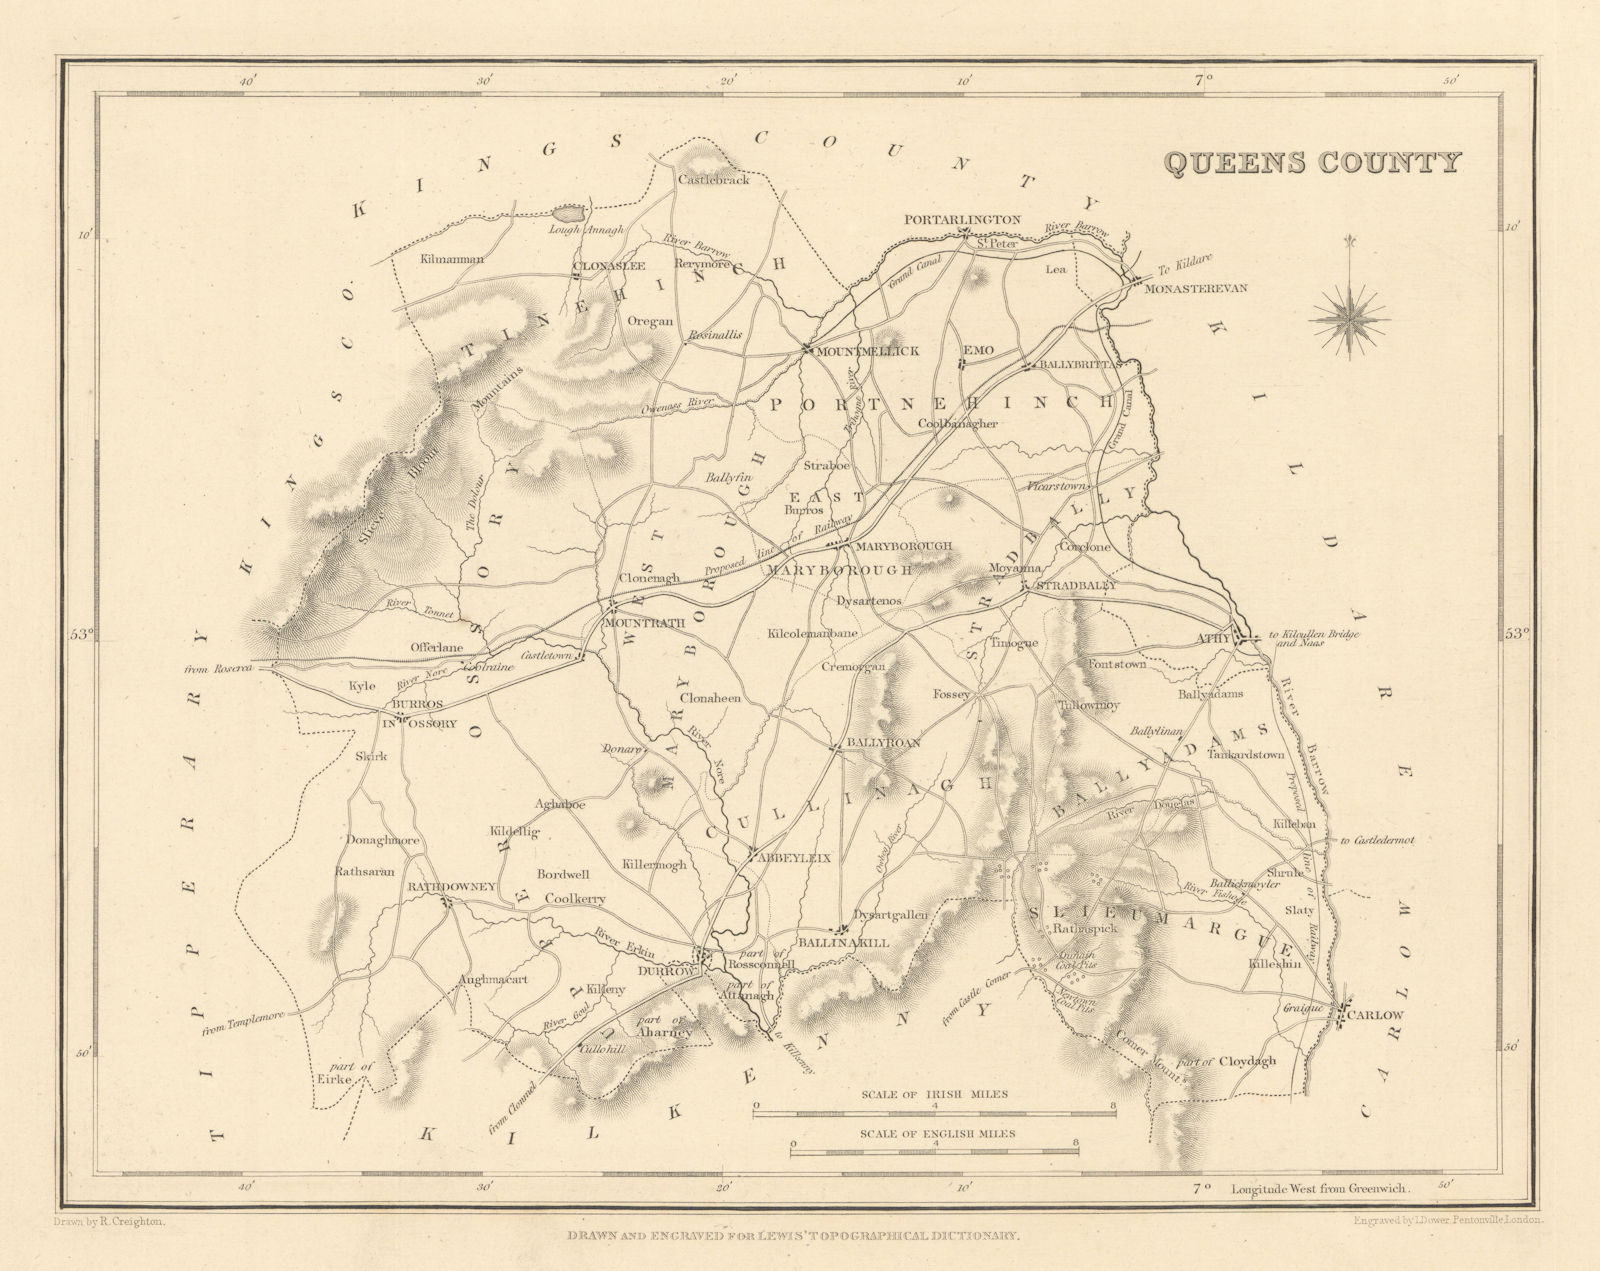 QUEENS COUNTY (LAOIS) antique map for LEWIS - CREIGHTON & DOWER - Ireland 1837